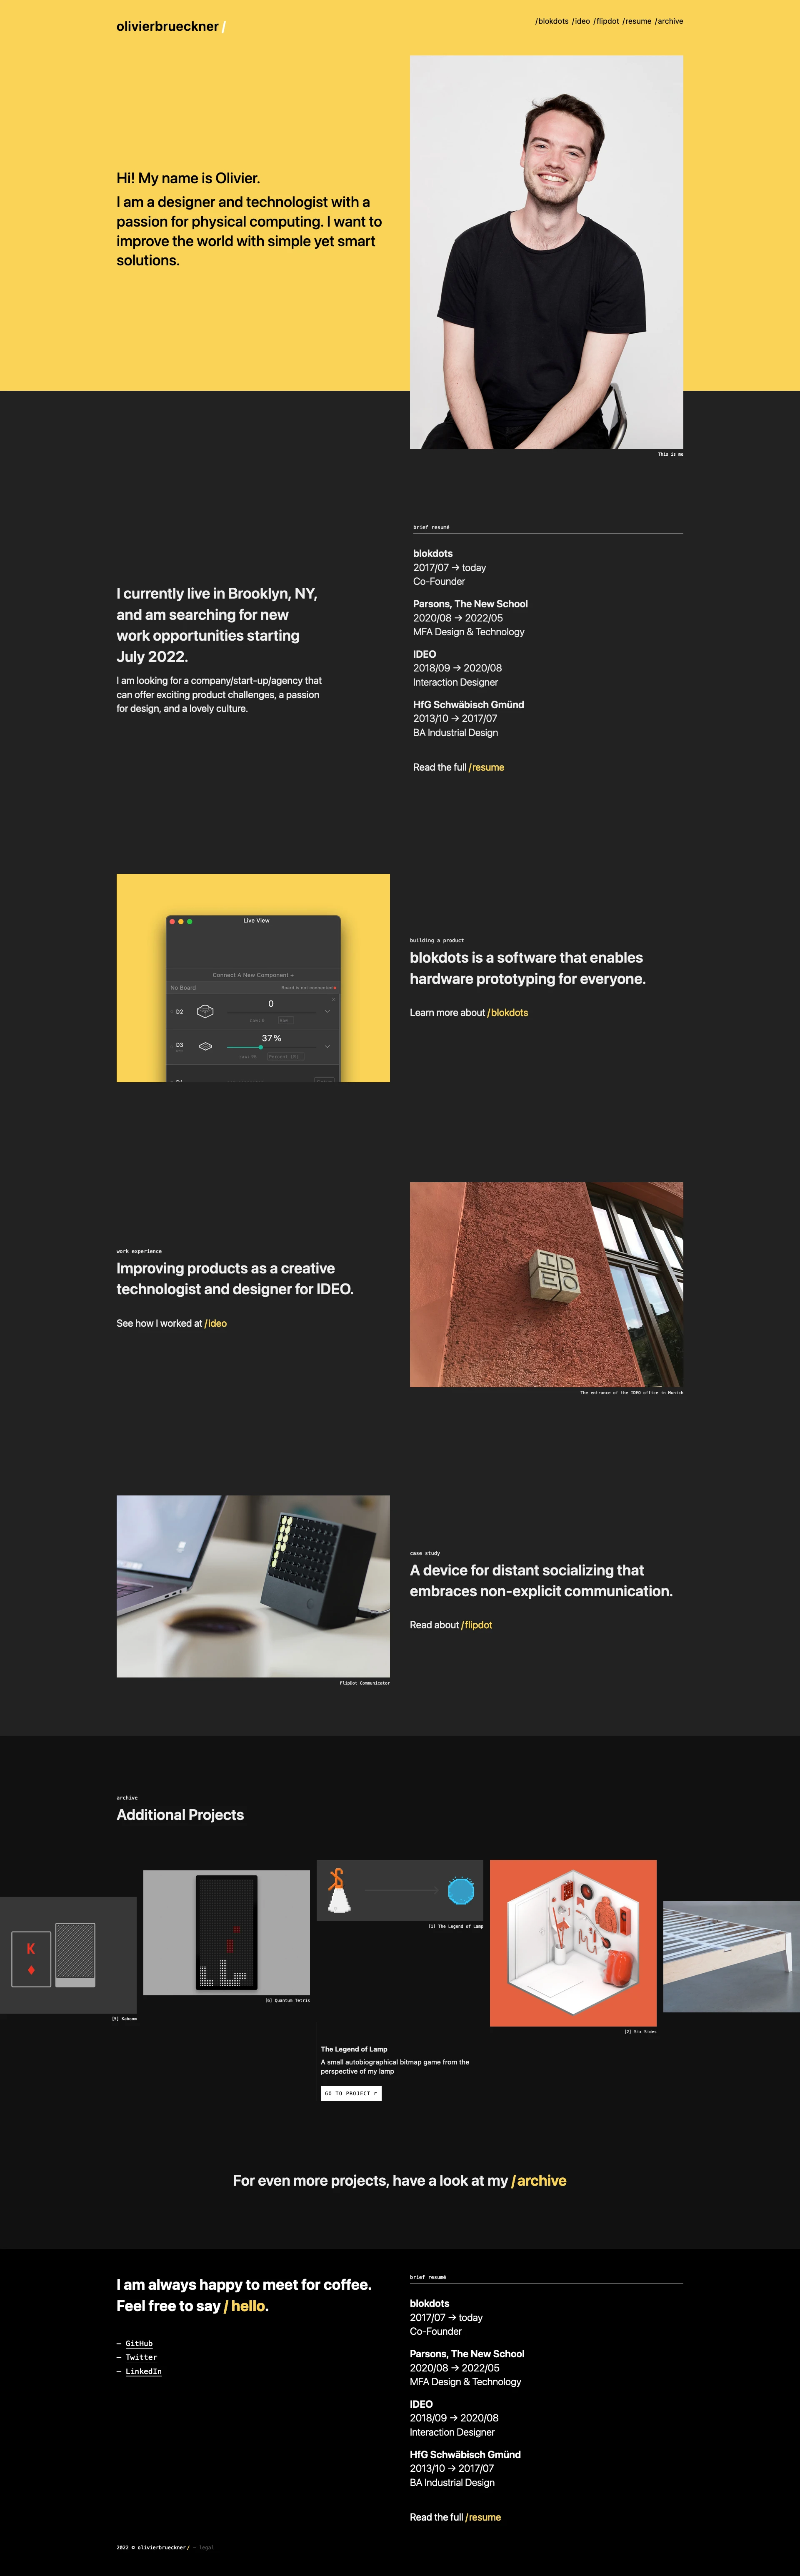 olivierbrueckner Landing Page Example: I am a designer and technologist with a passion for physical computing. I want to improve the world with simple yet smart solutions.